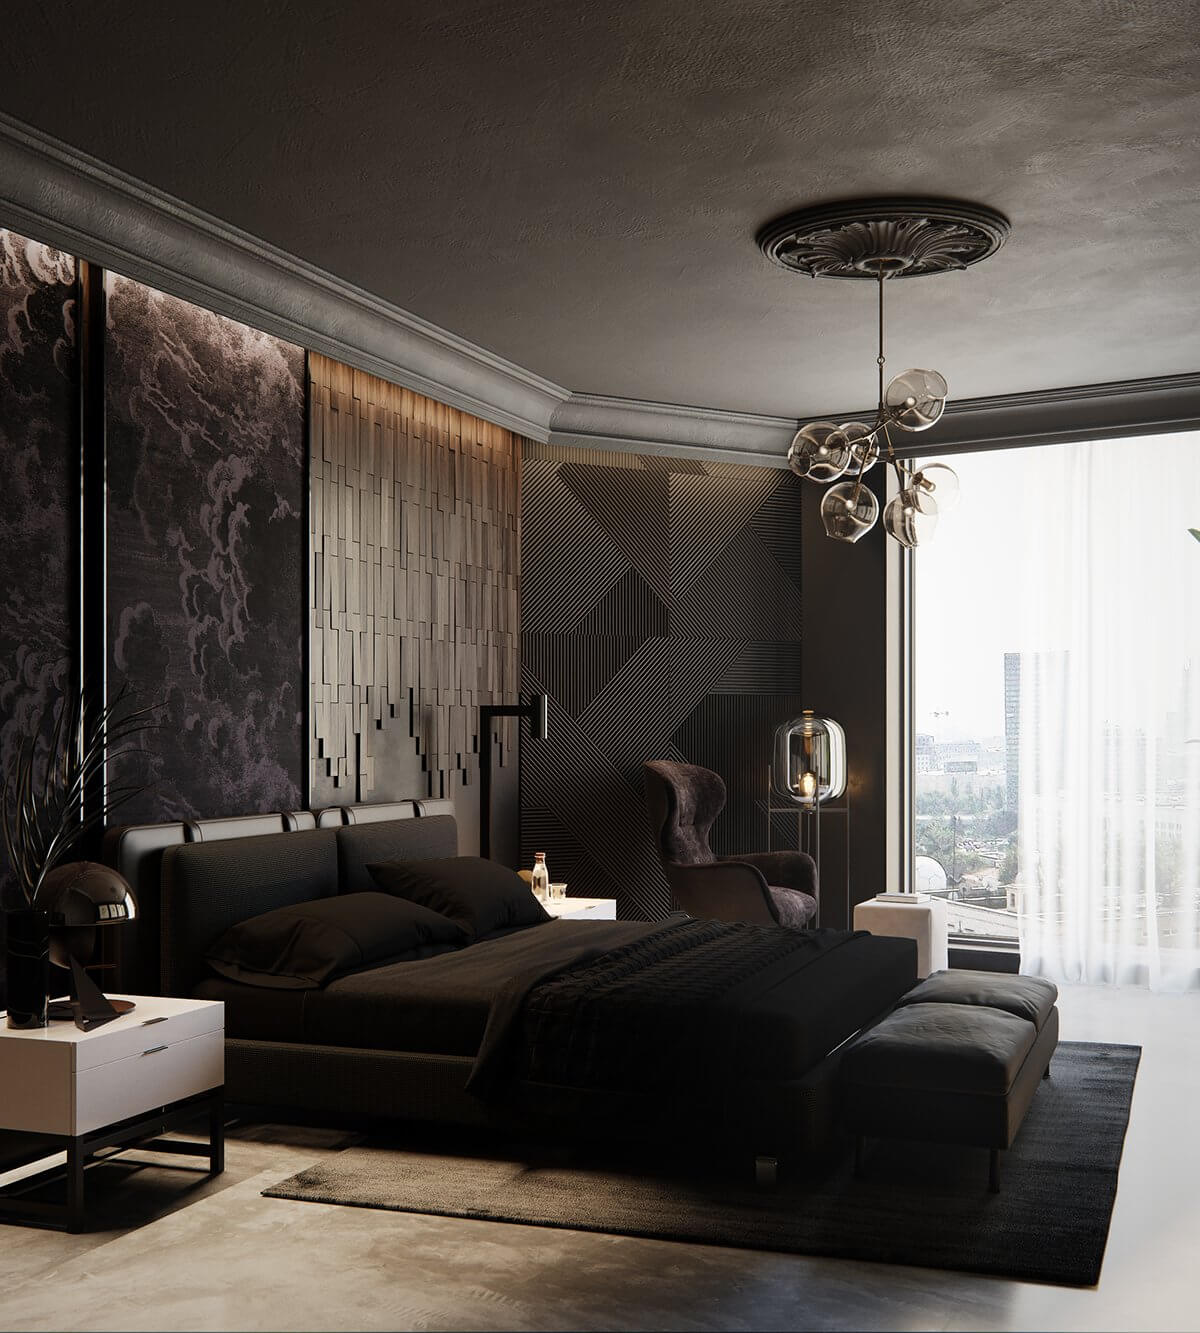 Moscow apartment bedroom black bed 2 - cgi visualization